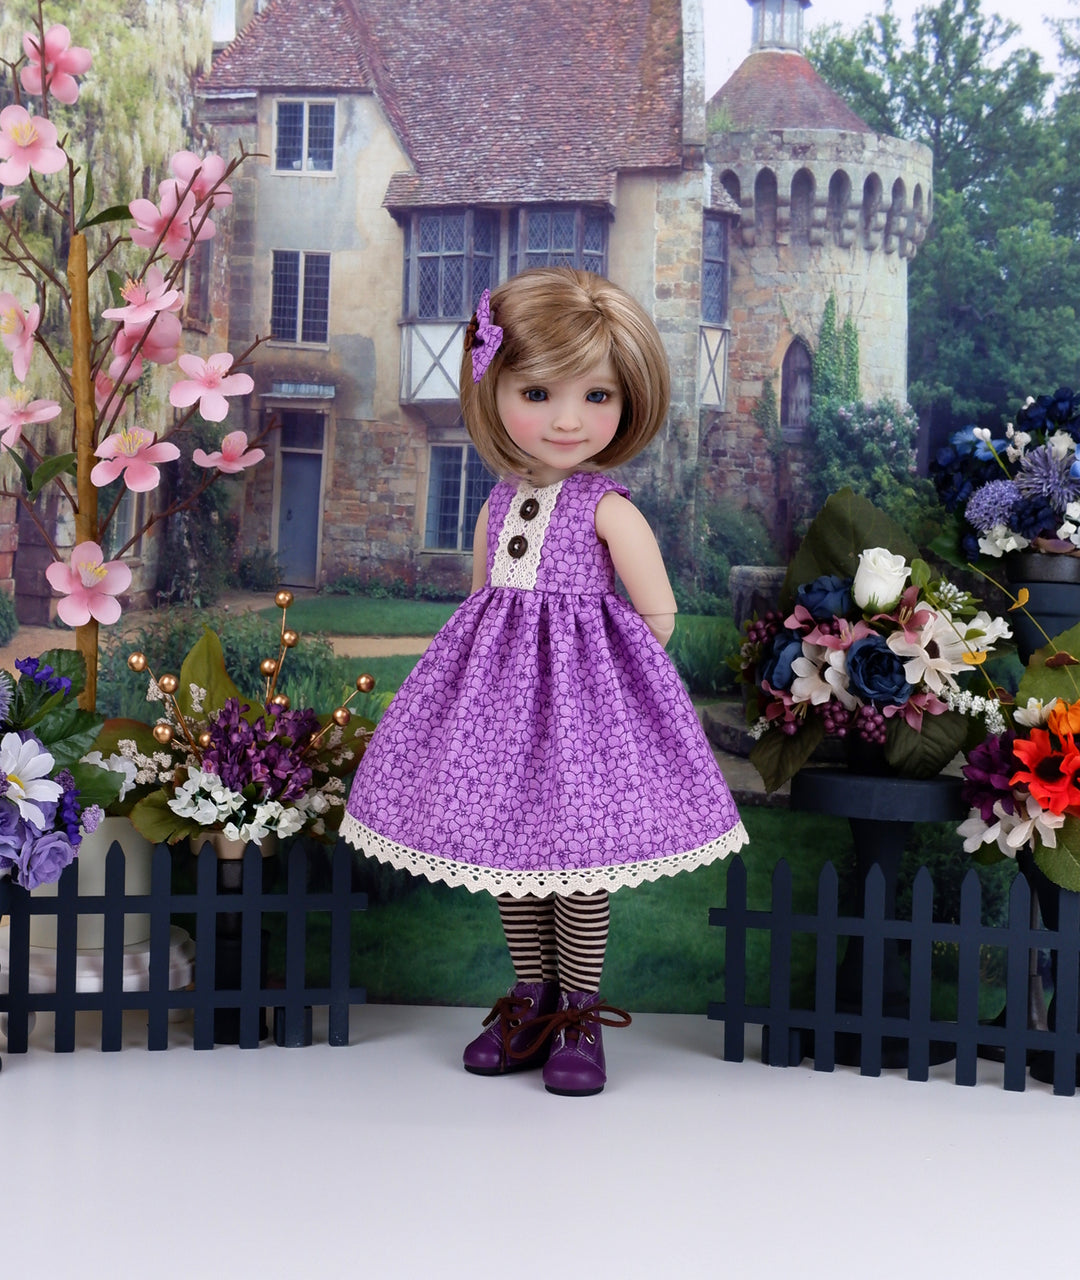 Autumn Violas - dress and sweater with boots for Ruby Red Fashion Friends doll